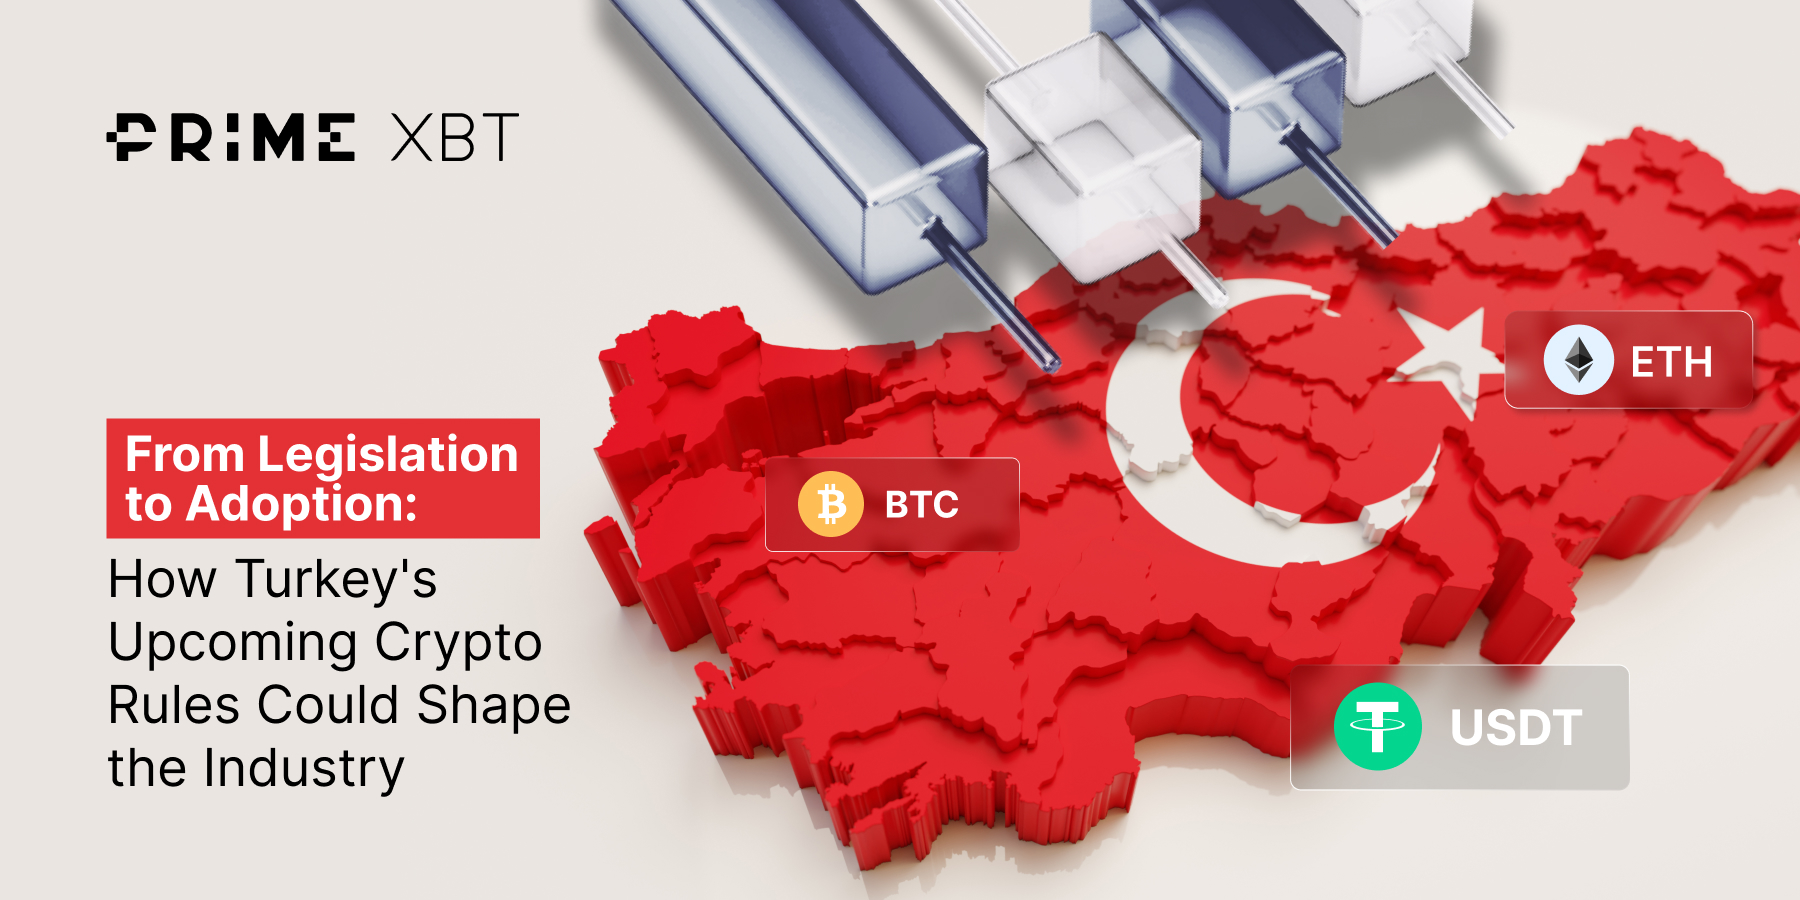 From Legislation to Adoption: How Turkey's Upcoming Crypto Rules Could Shape the Industry - How Turkeys Upcoming Crypto Rules Could Shape the Industry